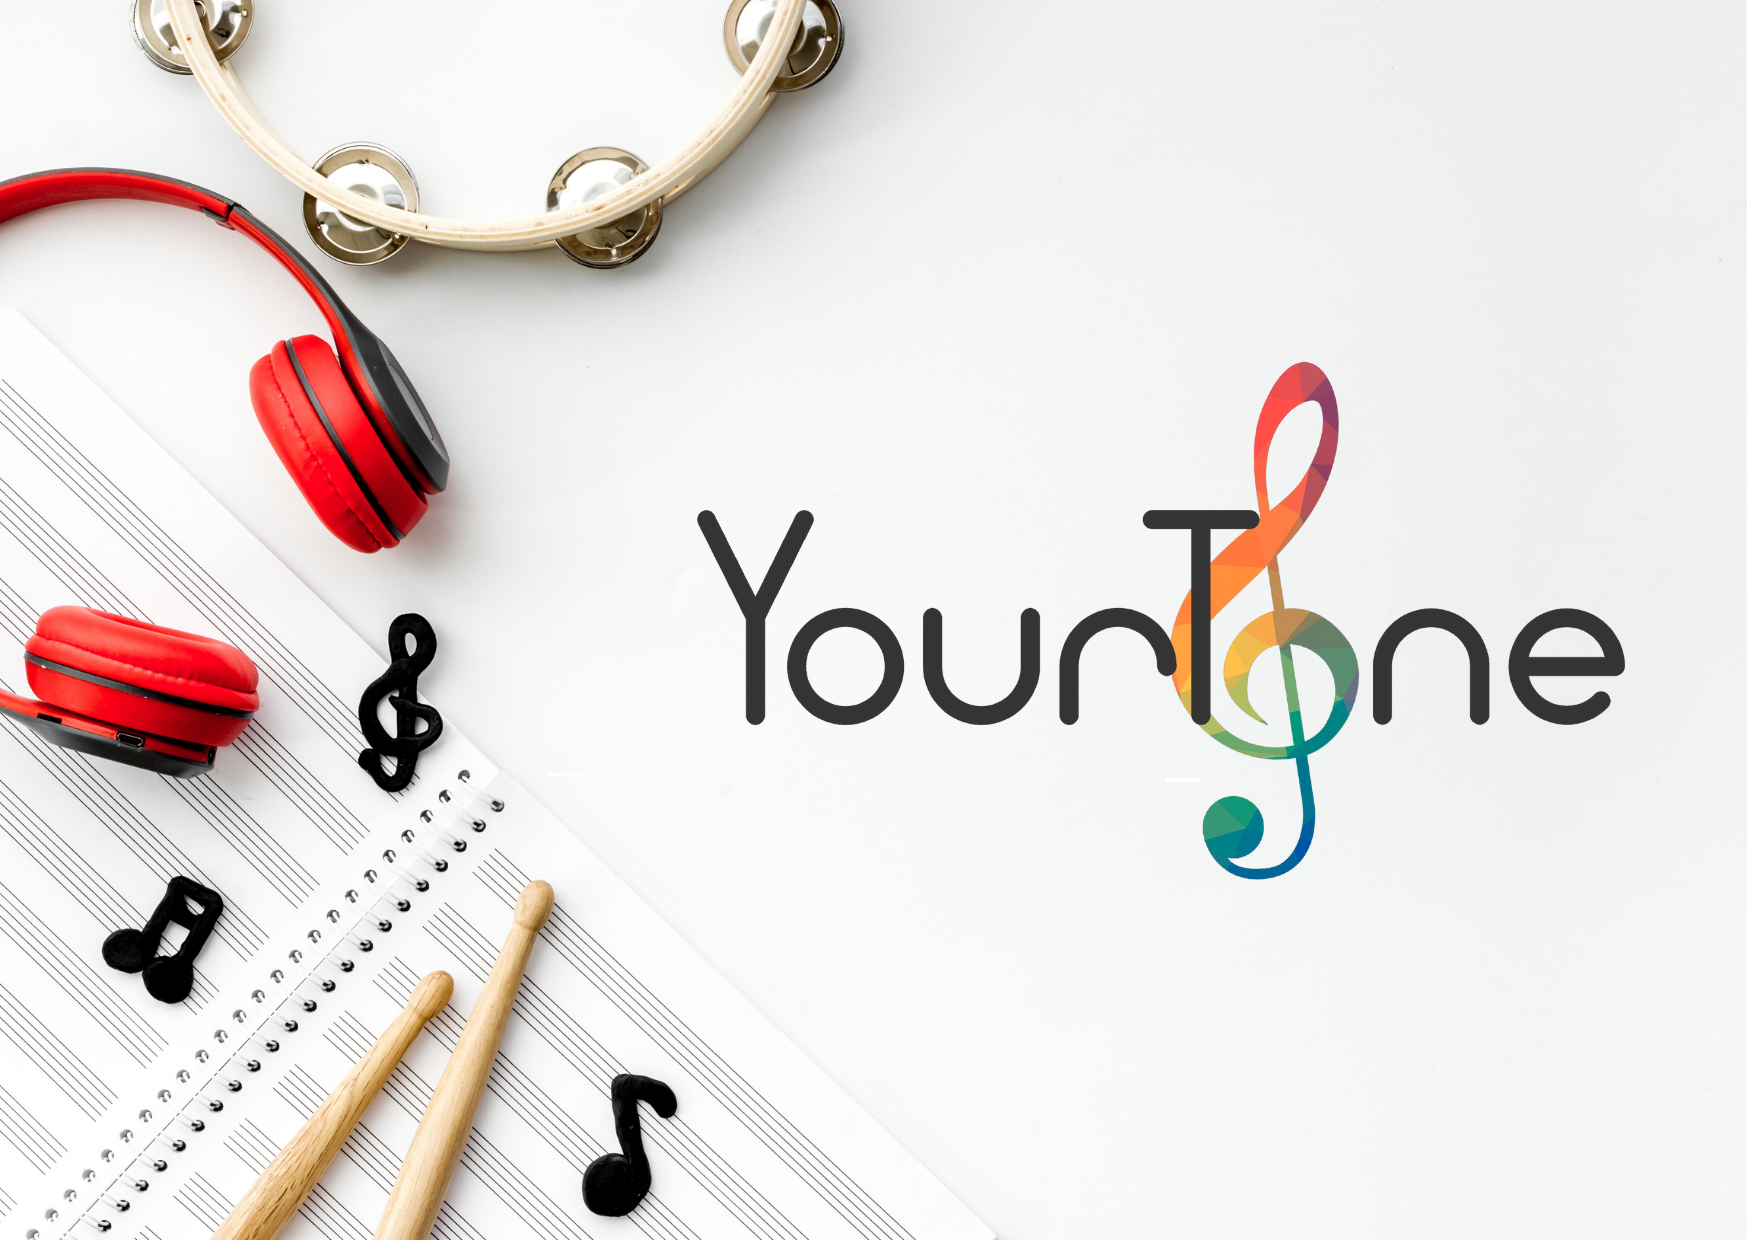 YourTone logo with musical instruments